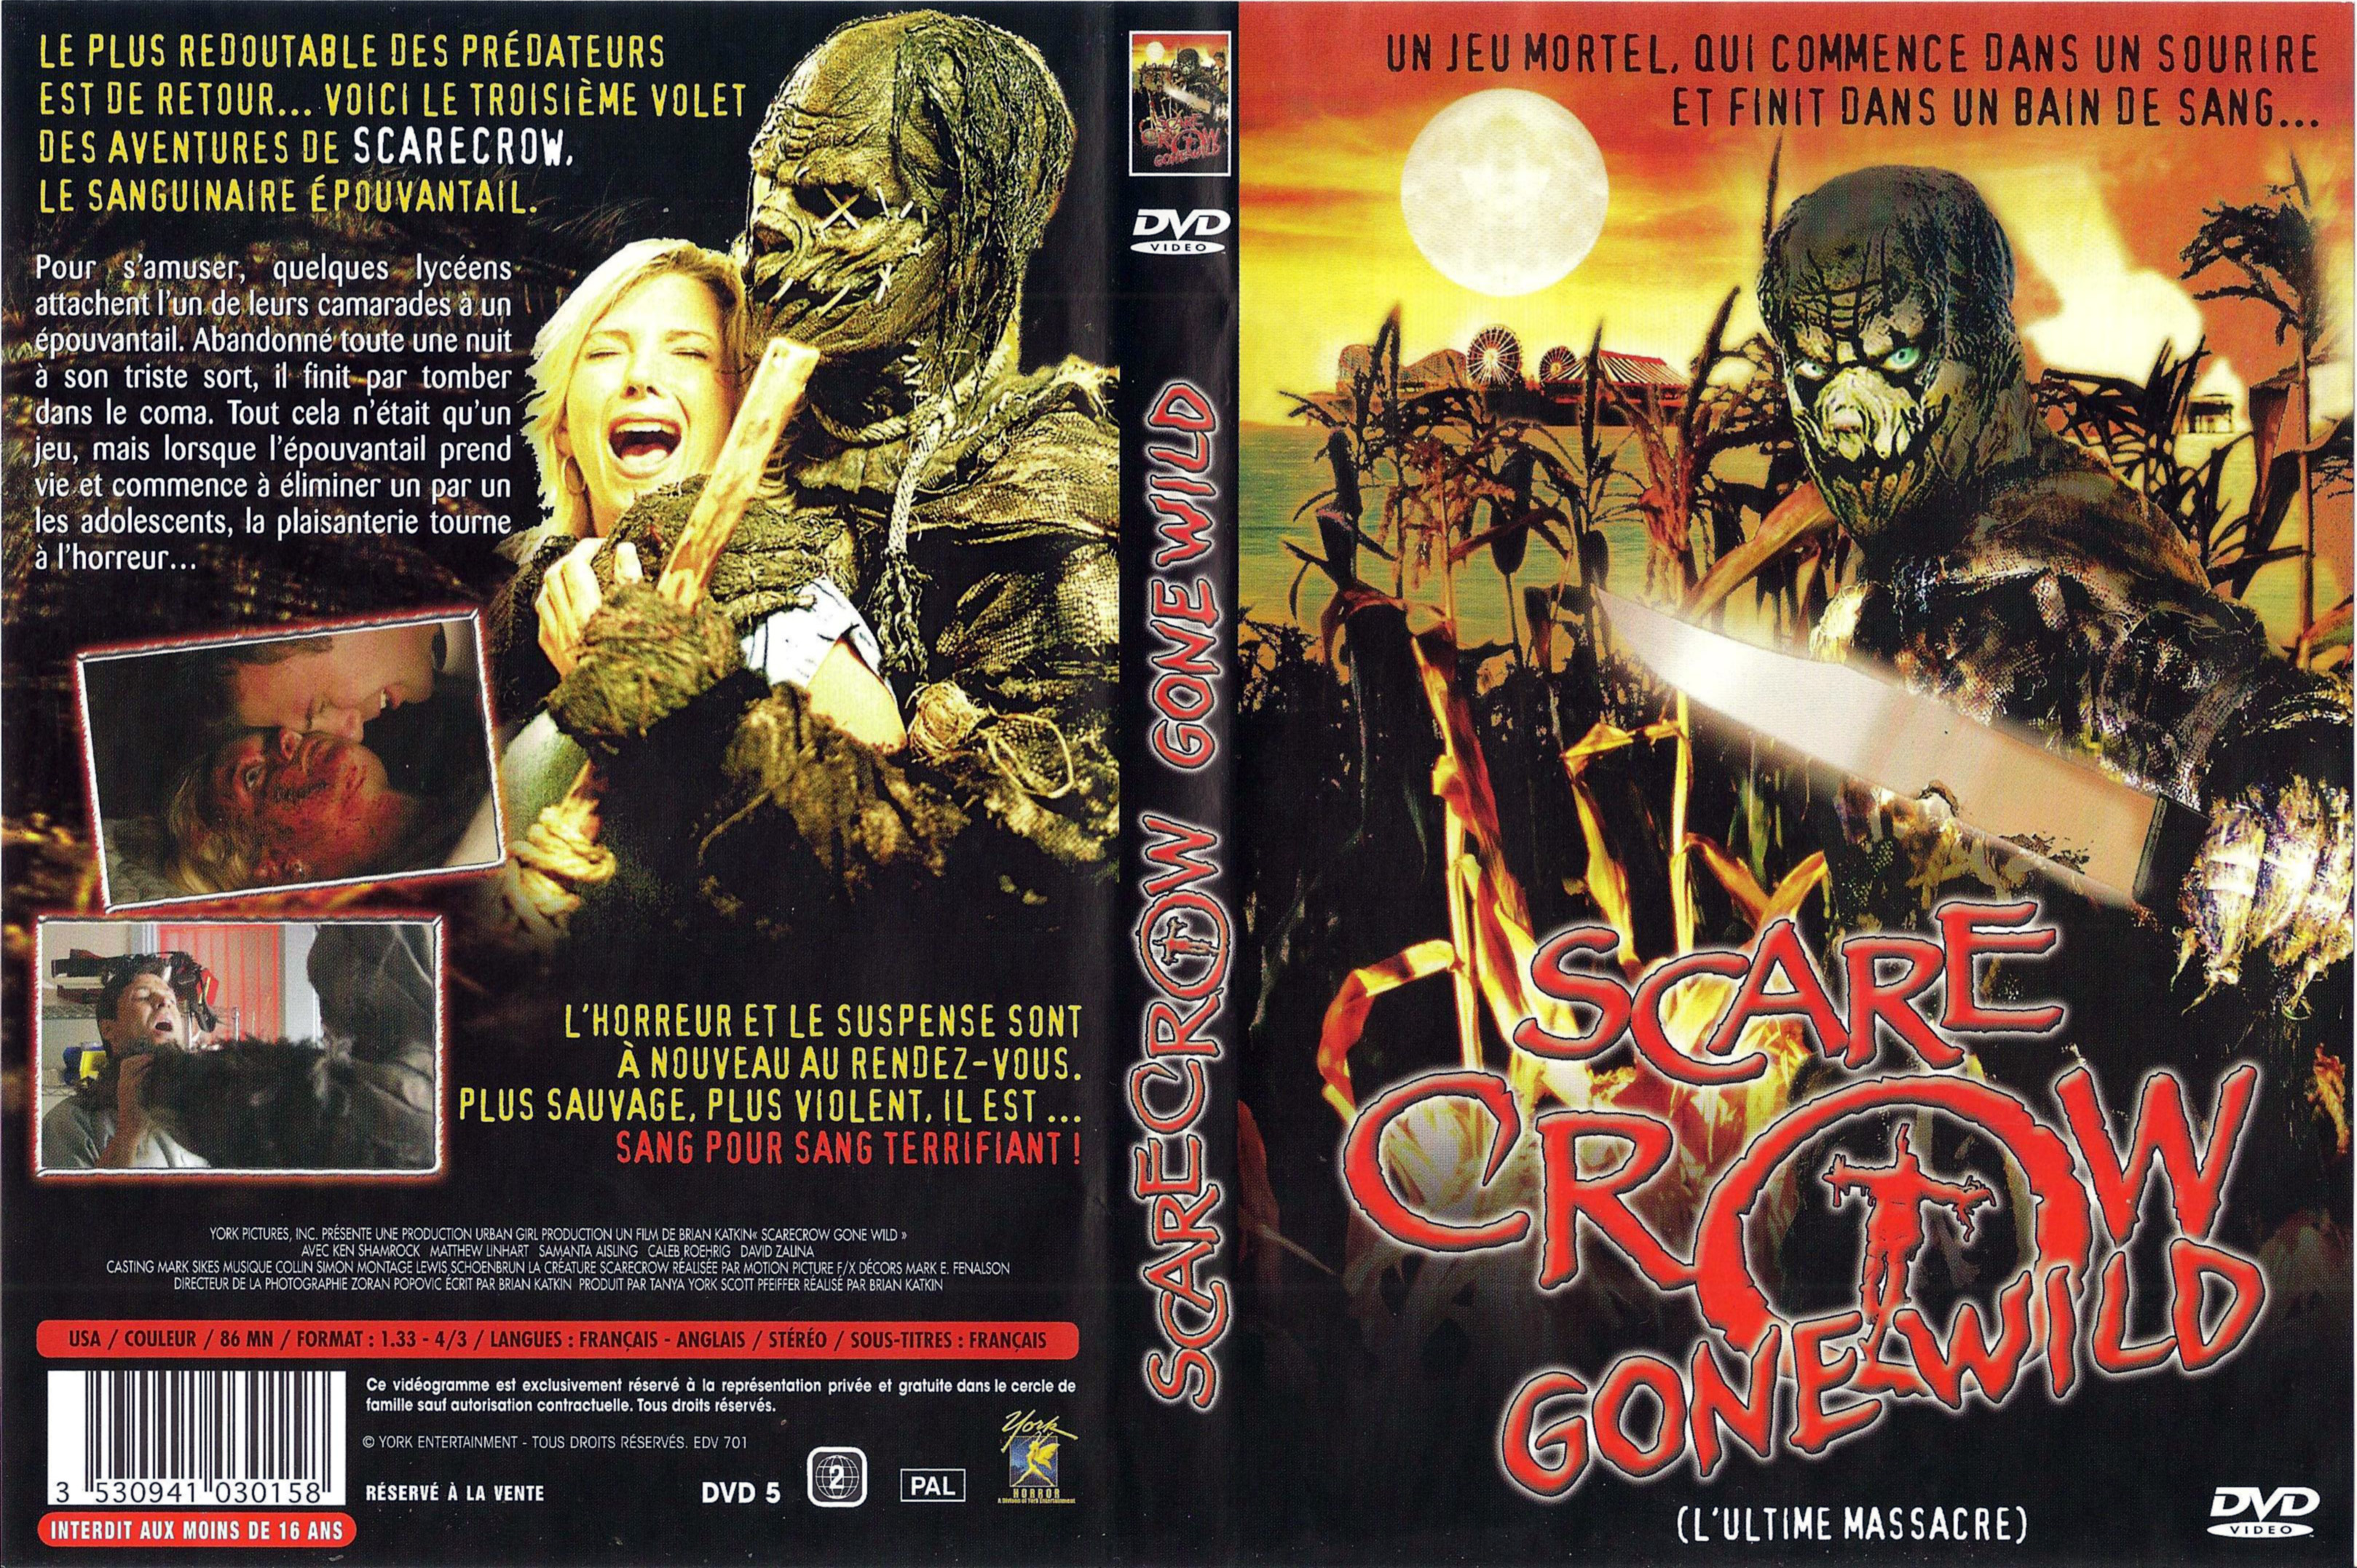 Jaquette DVD Scare Crow Gone wild